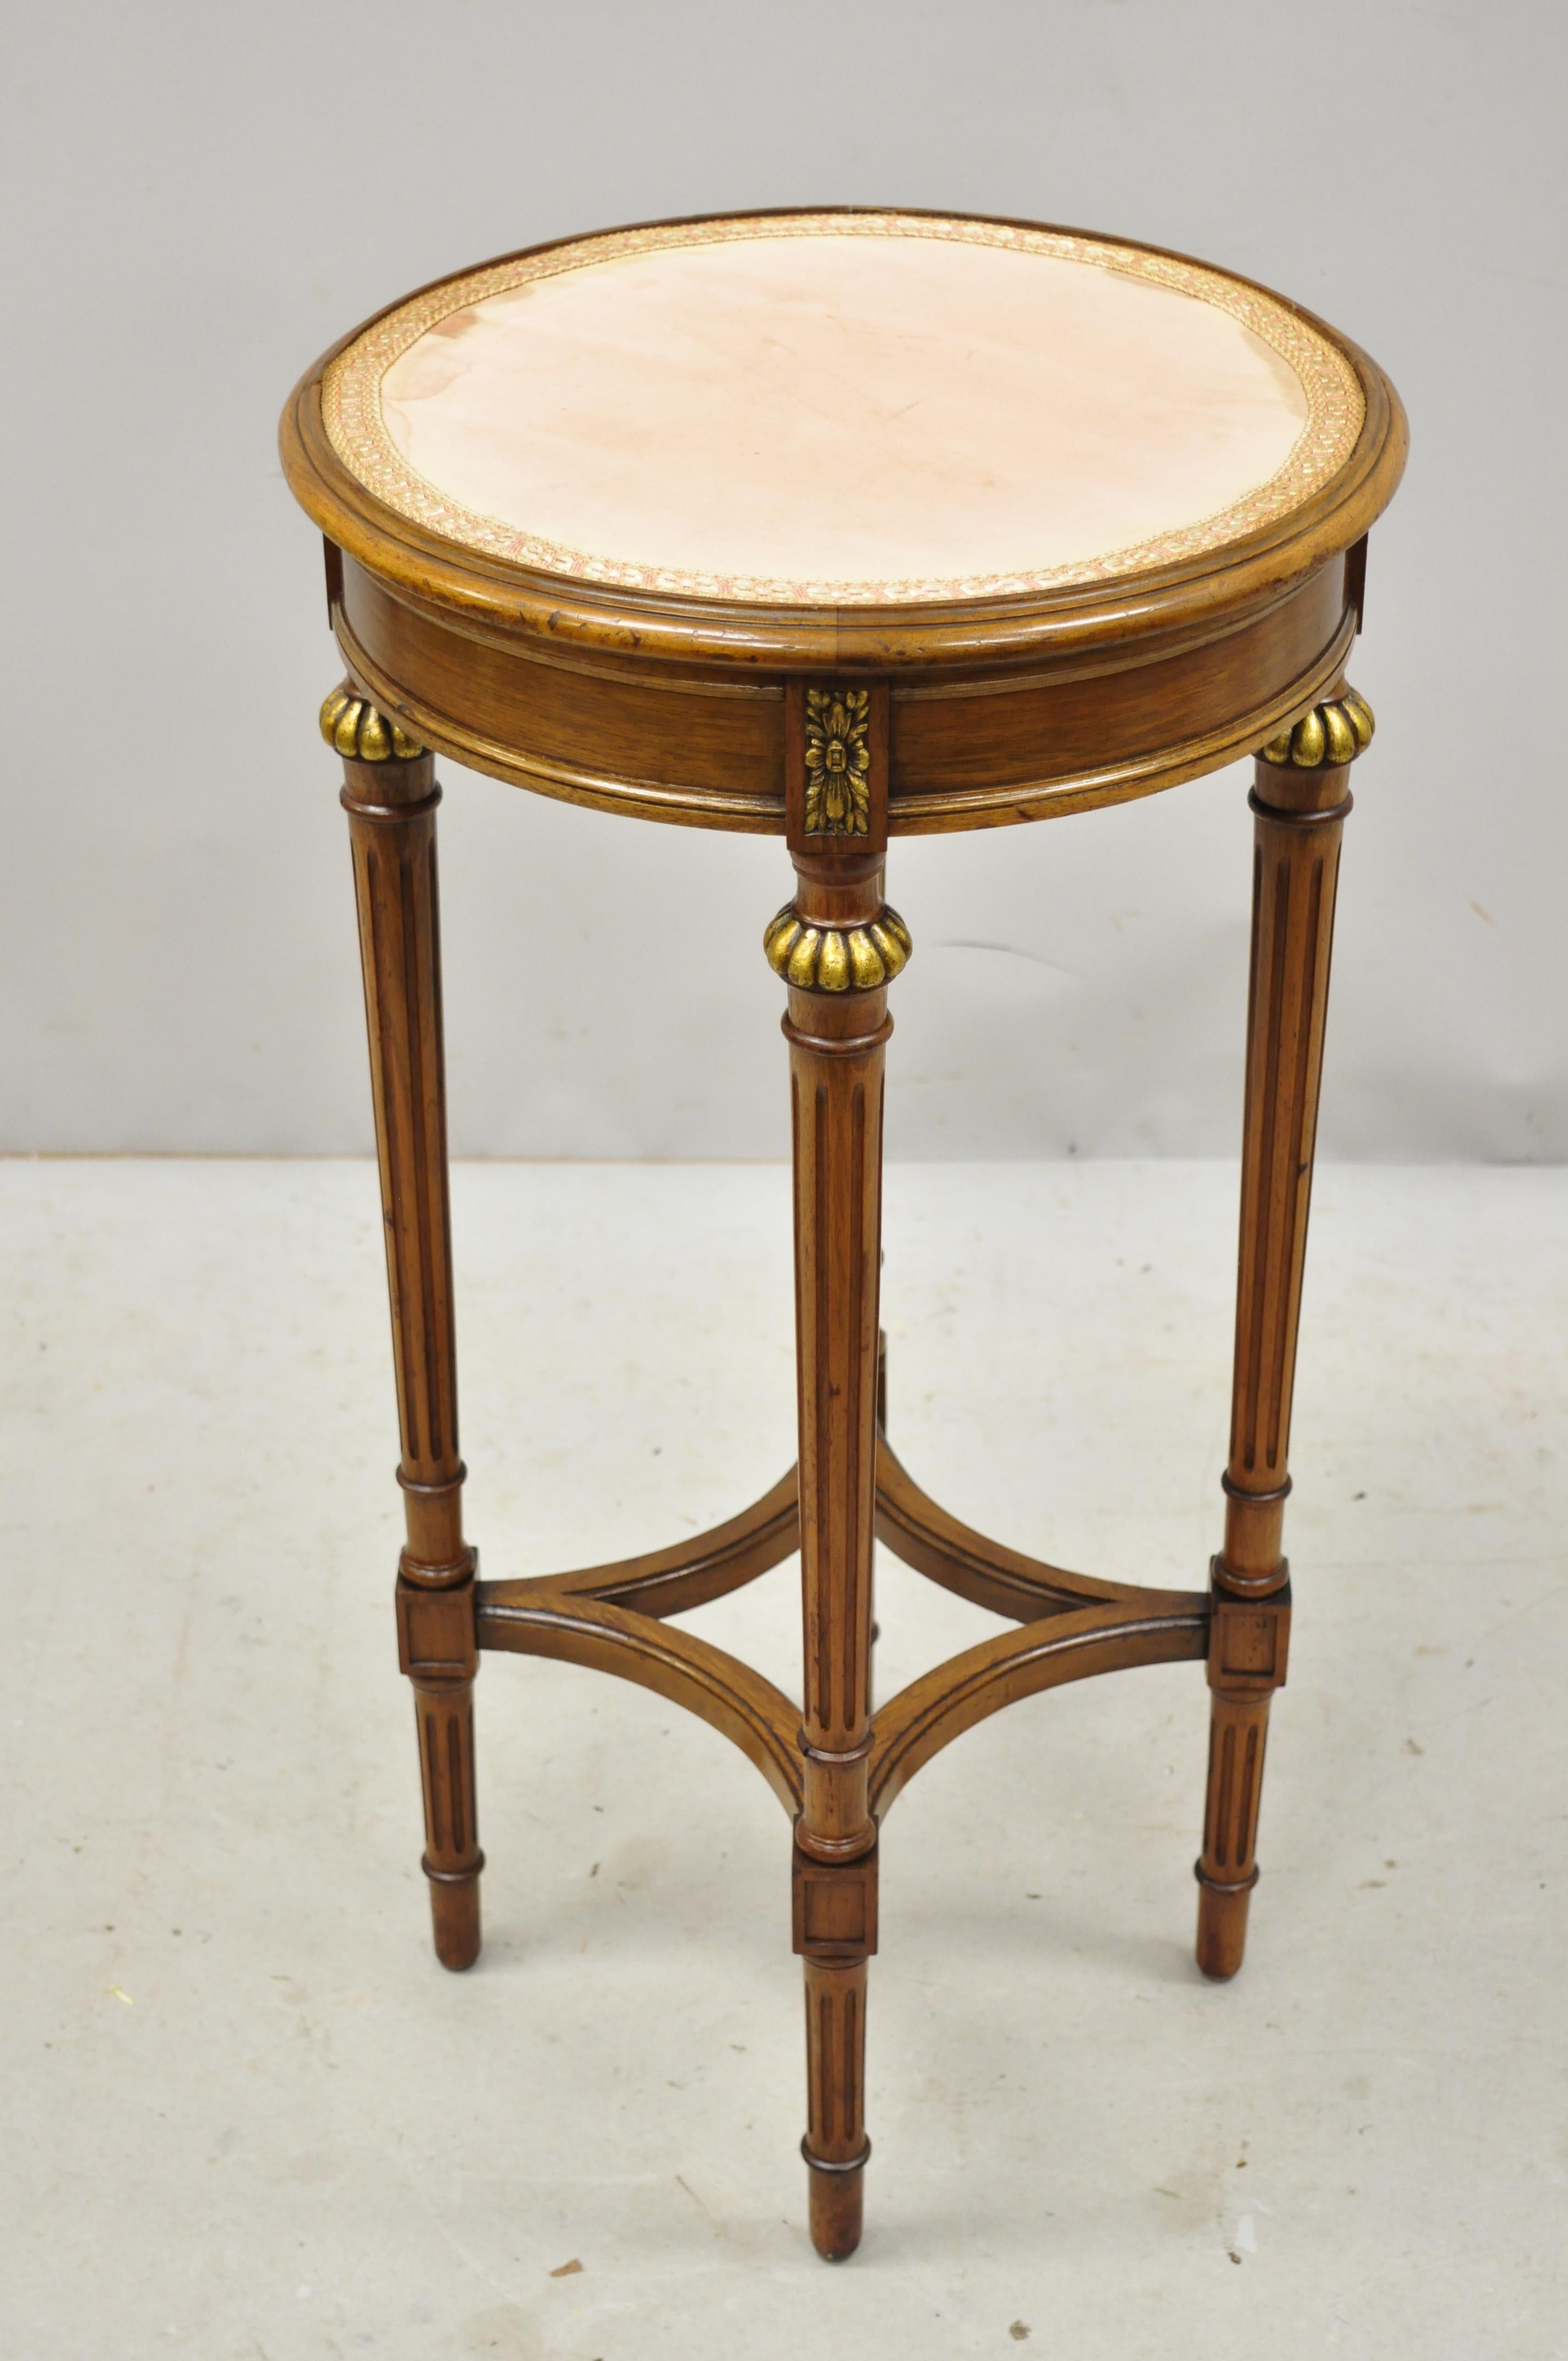 Antique French Louis XVI style small round carved walnut side lamp table. Item features solid wood frame, beautiful wood grain, nicely carved details, tapered legs, great style and form. Probably had a glass top, circa early 20th century.